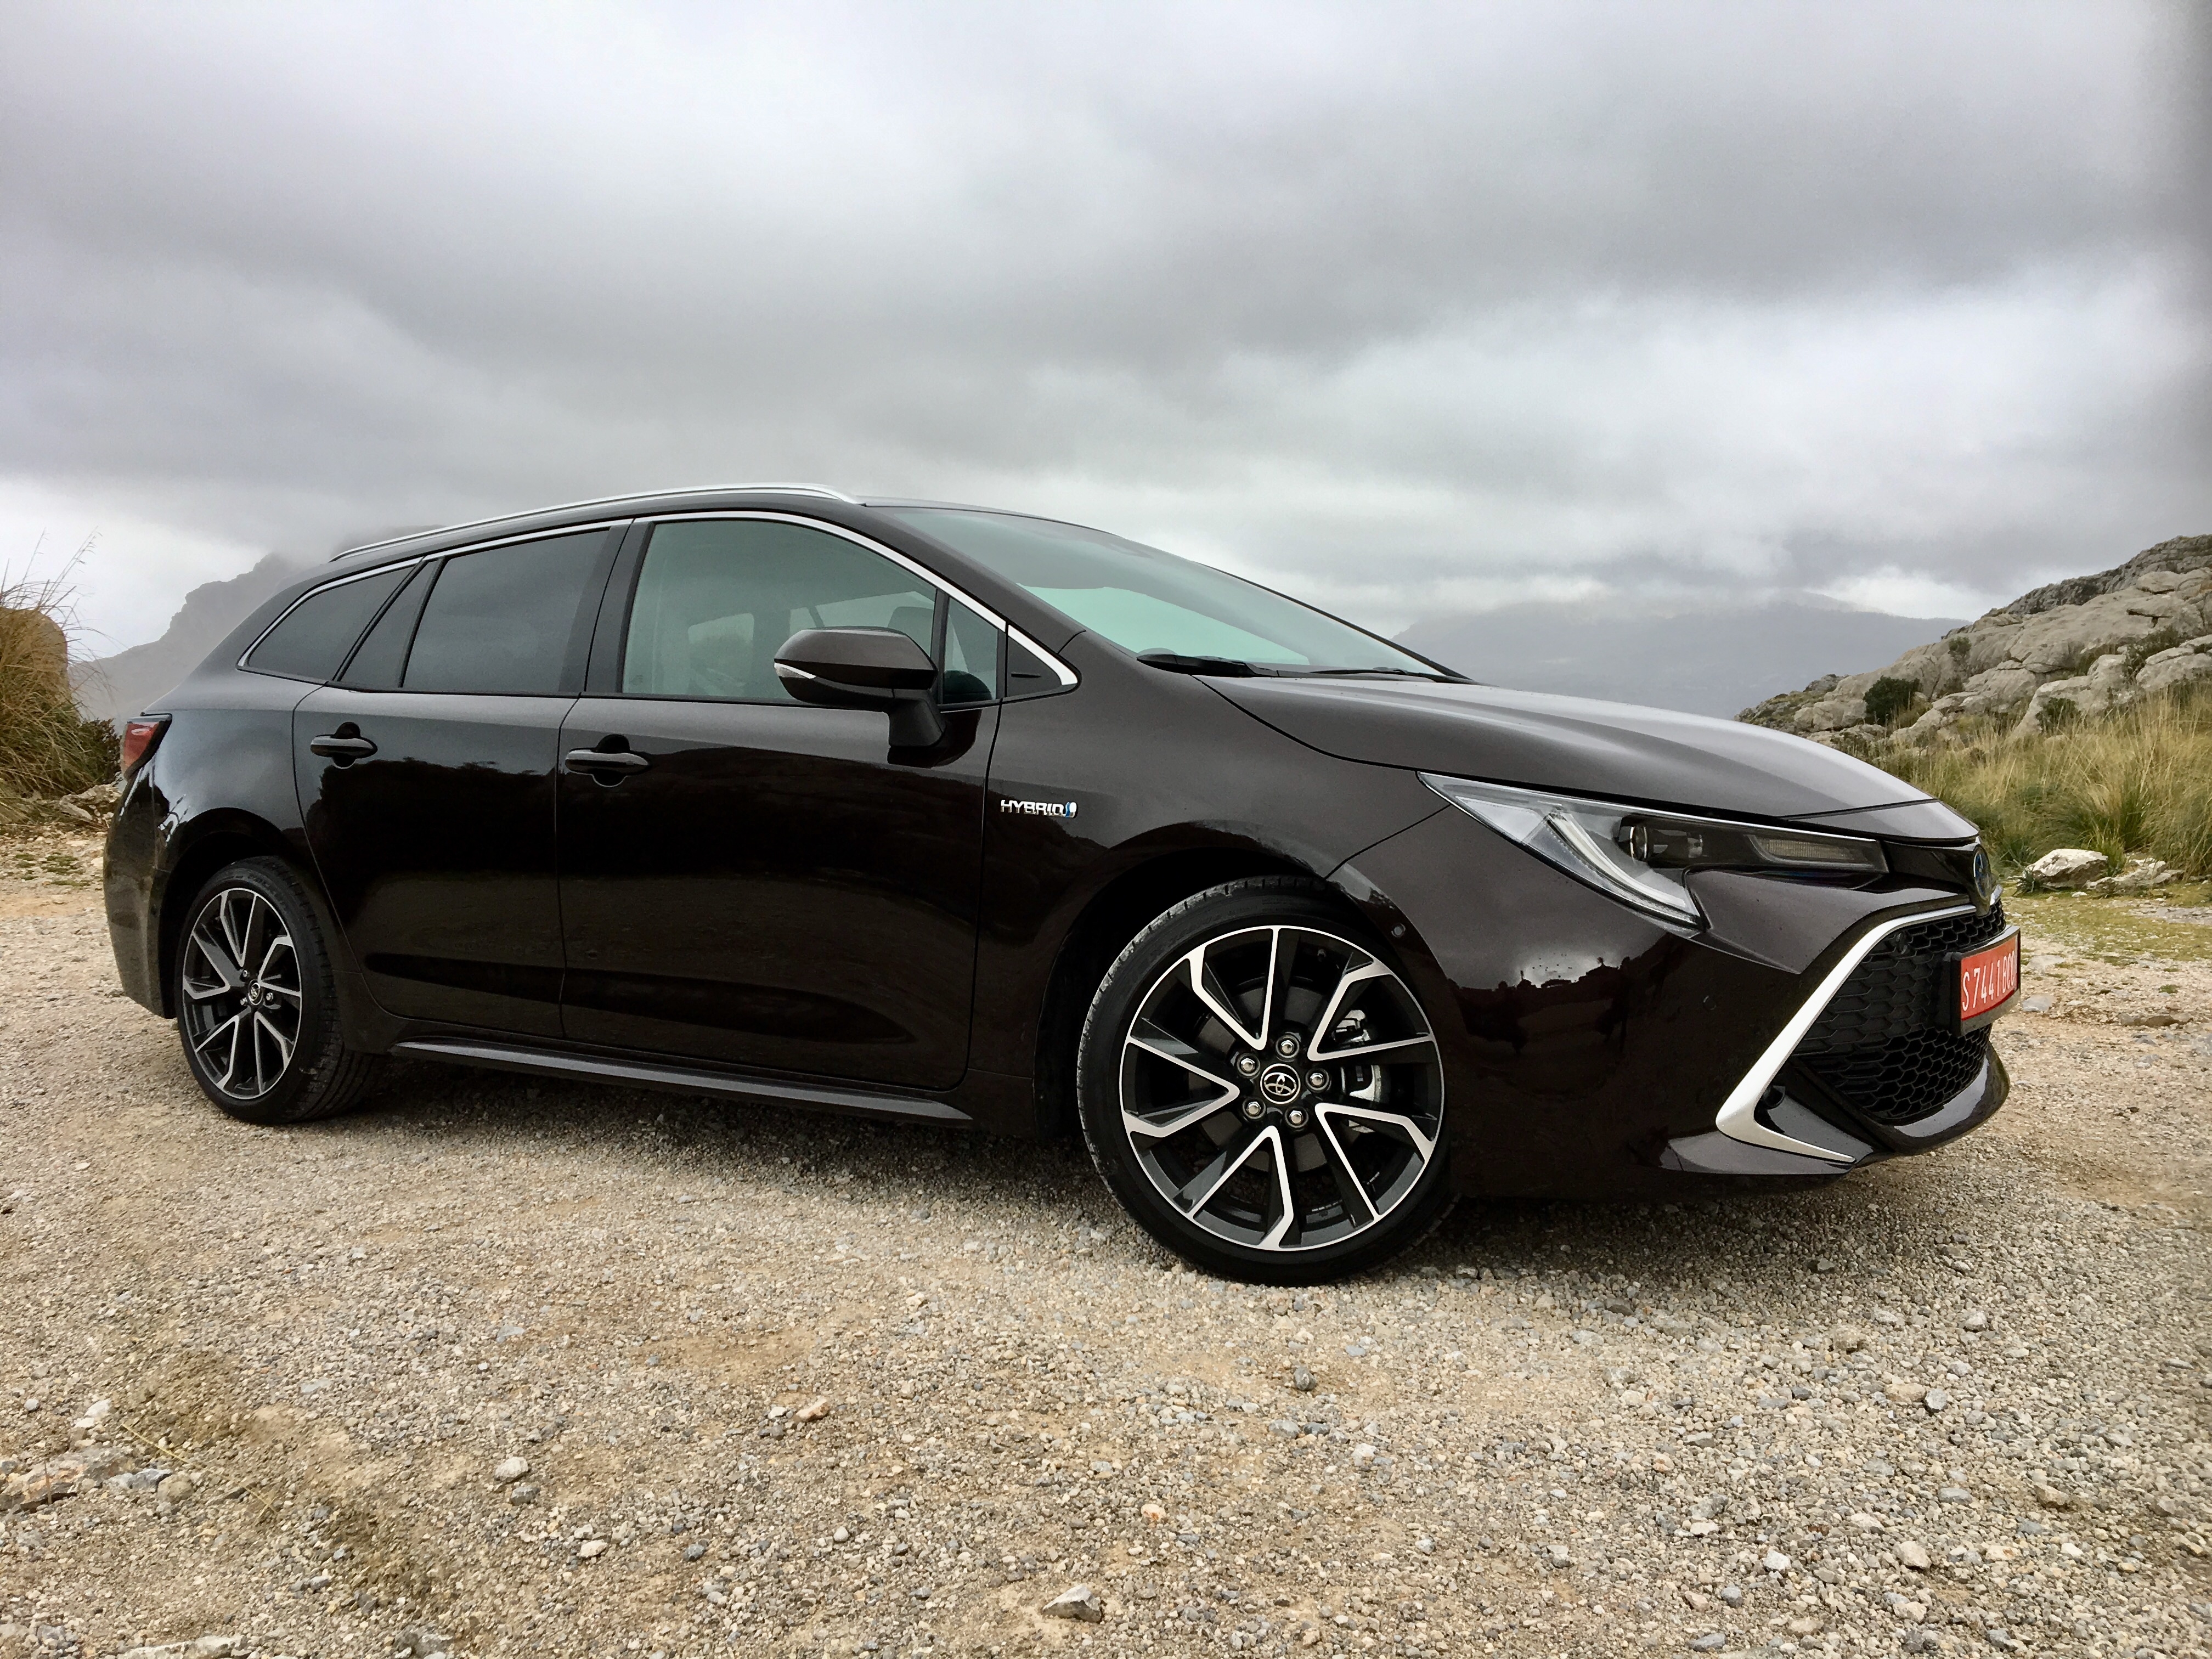 Toyota Corolla Touring Sports Hybrid accessories specifications